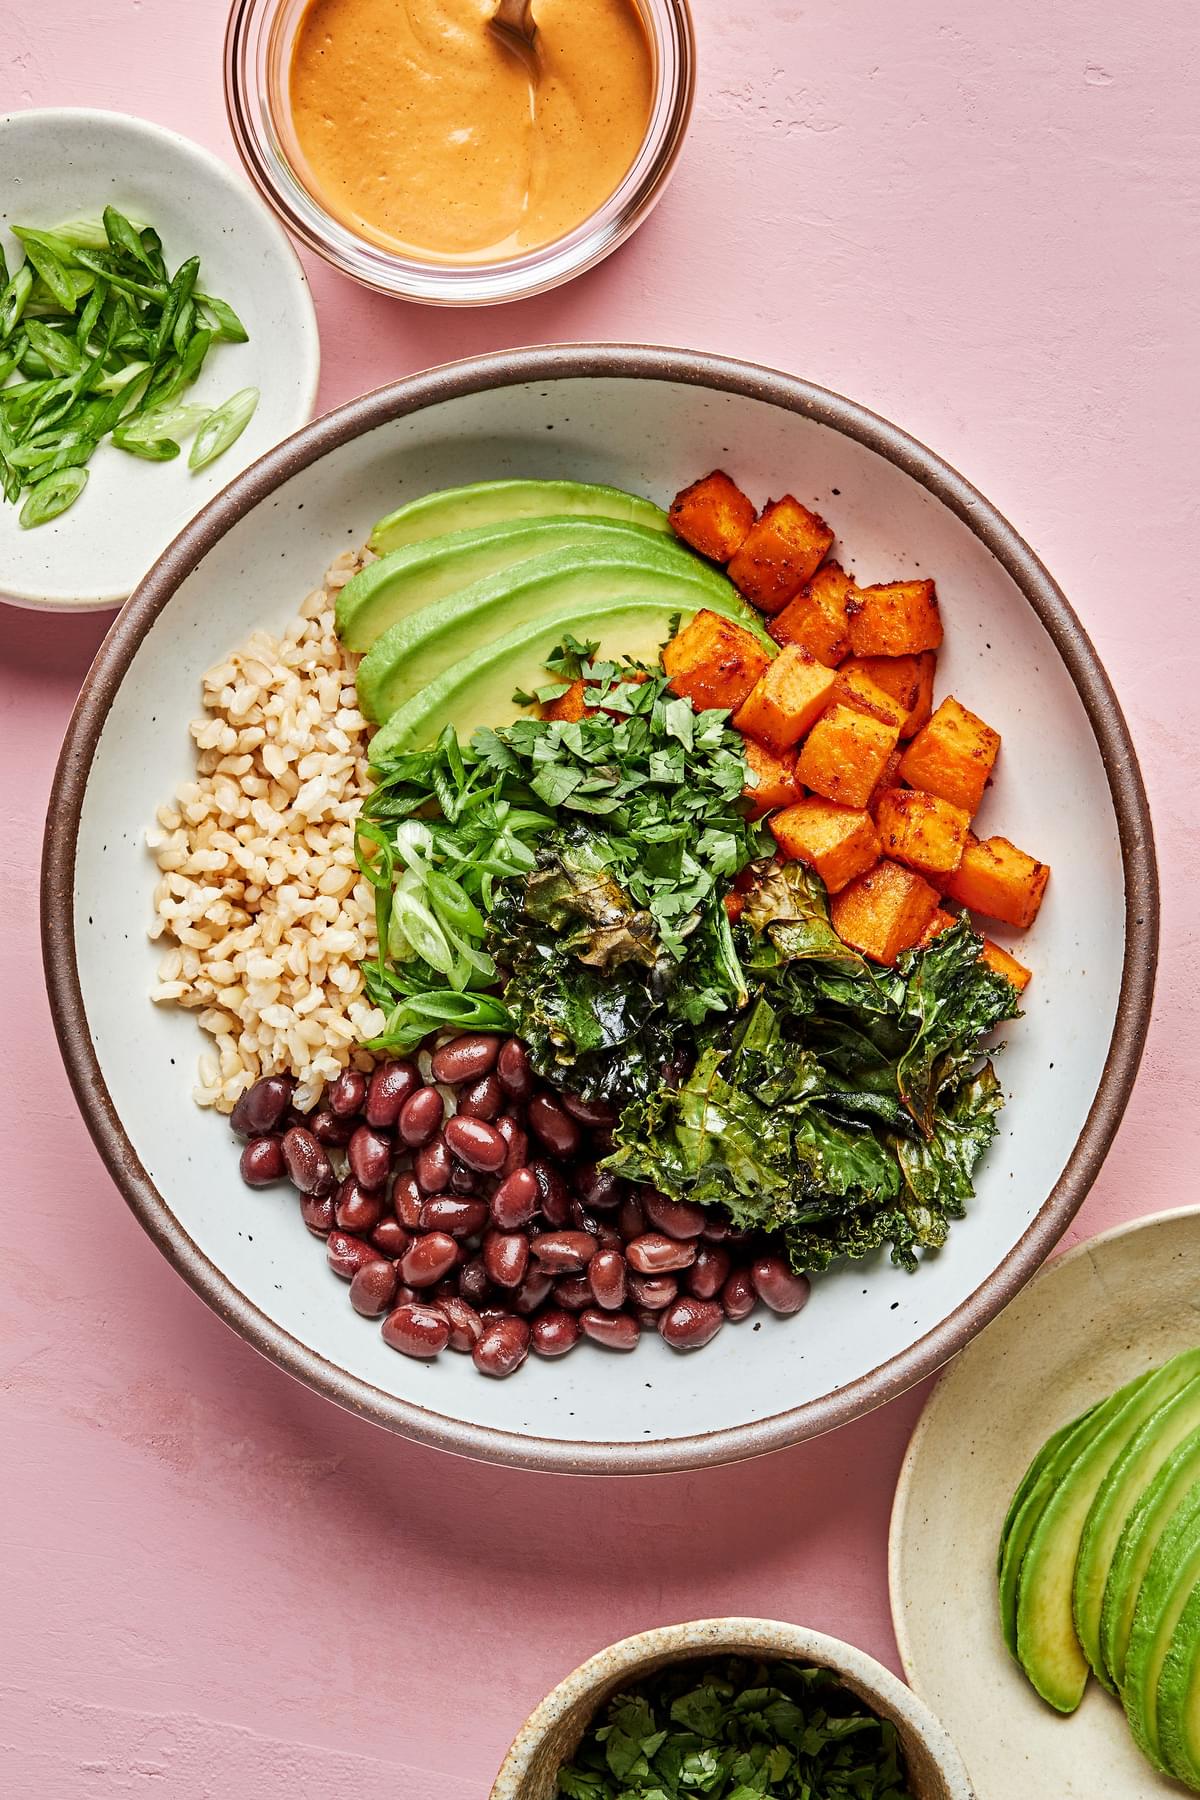 brown rice, black beans, avocado, roasted sweet potatoes and roasted kale in a bowl next to vegan cashew cheese sauce